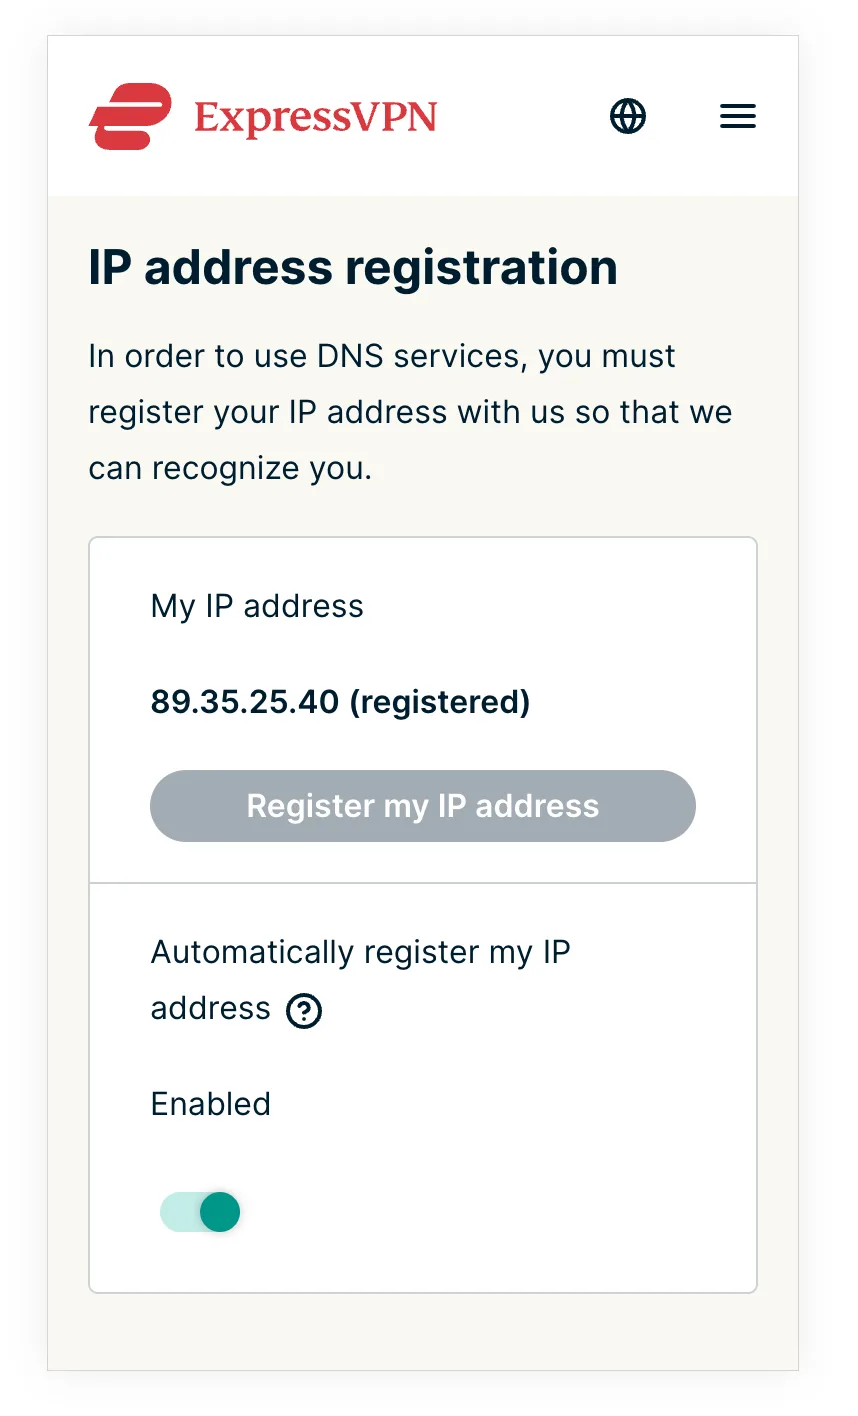 A screenshot displaying the IP address registration page from ExpressVPN. It indicates that to use DNS services, one must register their IP address. There is a button for registering the IP address and a toggle switch set to 'Enabled' for automatic registration.